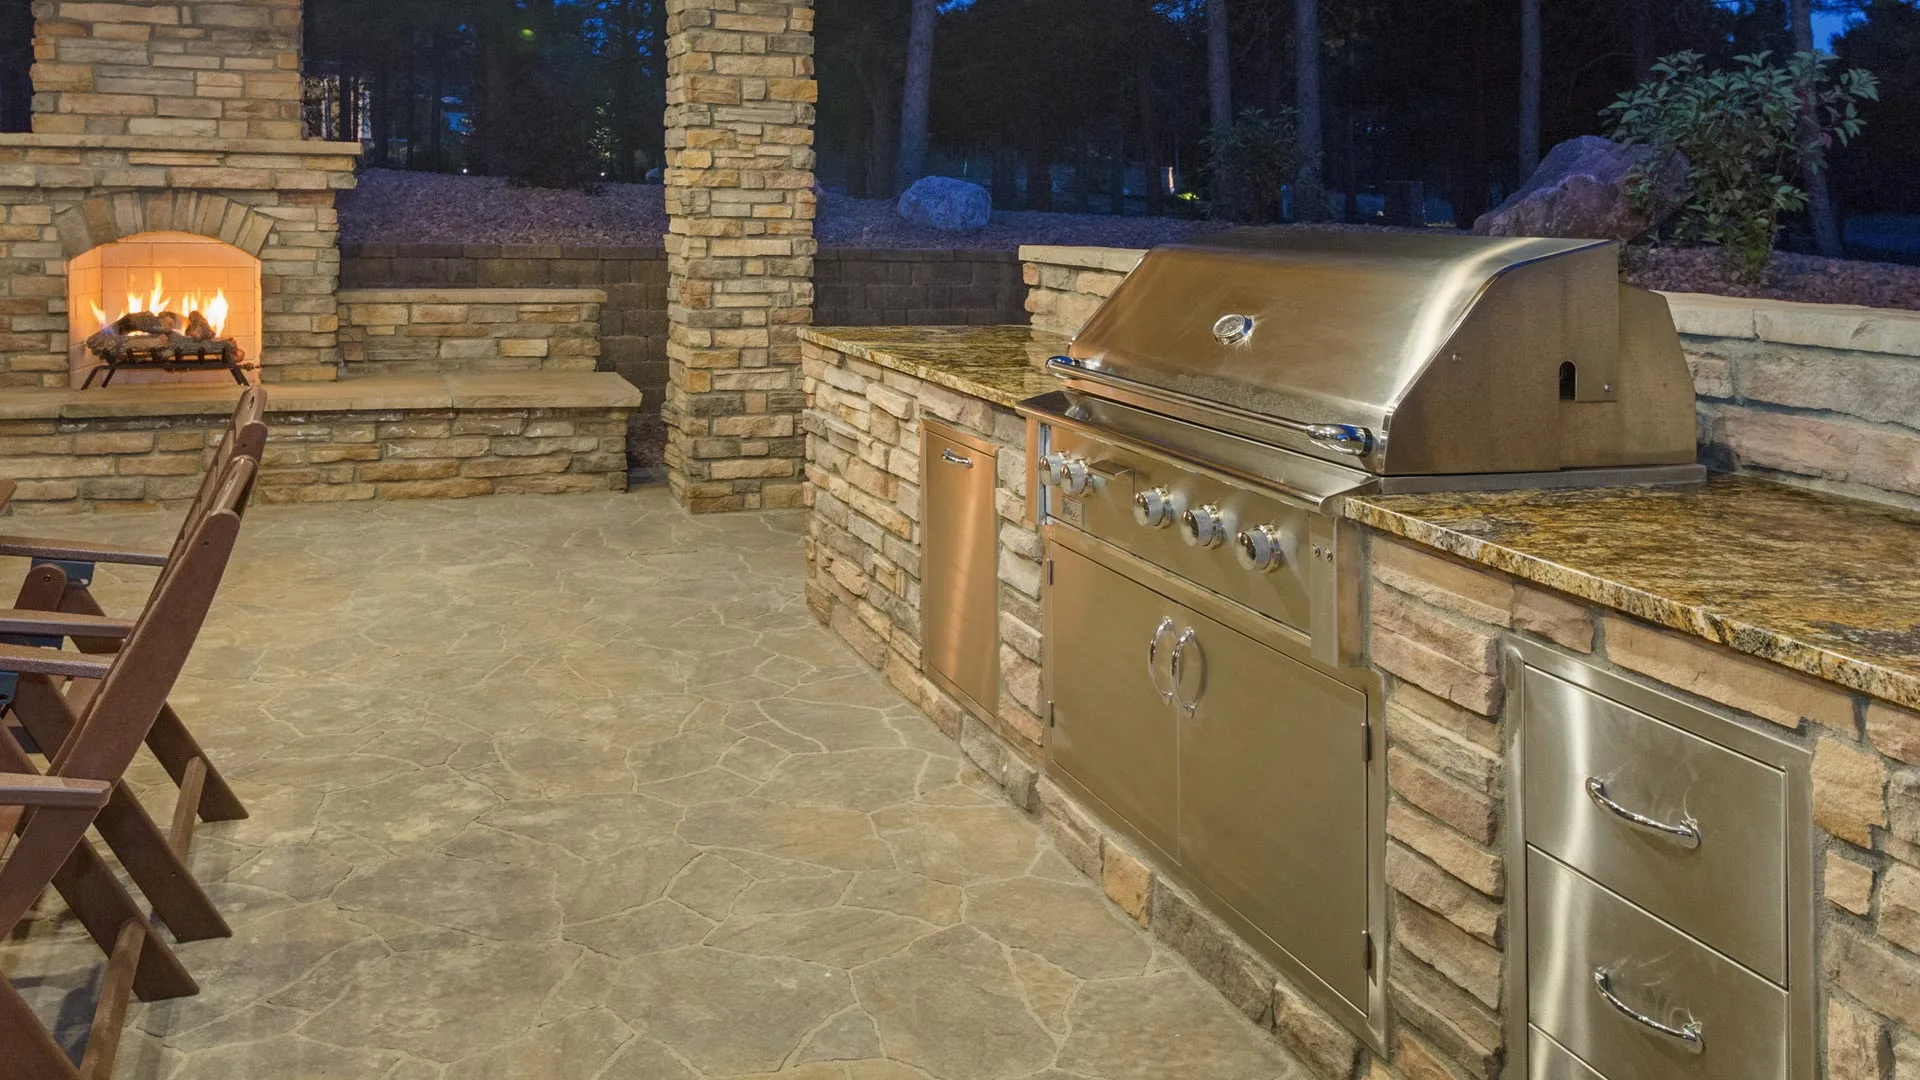 Outdoor kitchen with fireplace built at a home in Fraser, CO.